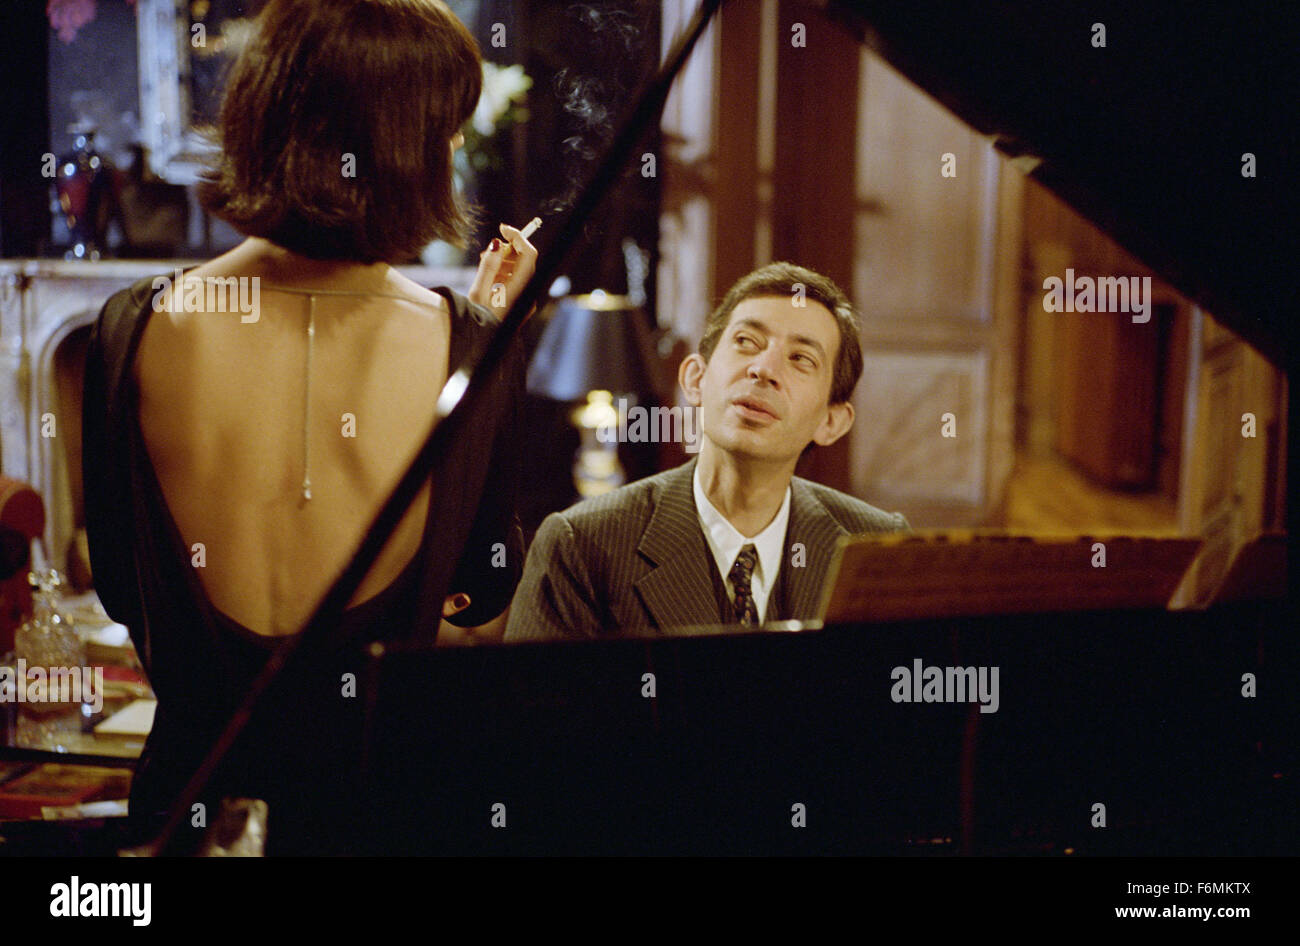 RELEASE DATE: March 18, 2010. MOVIE TITLE: Gainsbourg. STUDIO: One World Films. PLOT: A glimpse at the life of French singer Serge Gainsbourg, from growing up in 1940s Nazi-occupied Paris through his successful song-writing years in the 1960s to his death in 1991 at the age of 62. PICTURED: Eric Elmosnino as Serge Gainsbourg. Stock Photo